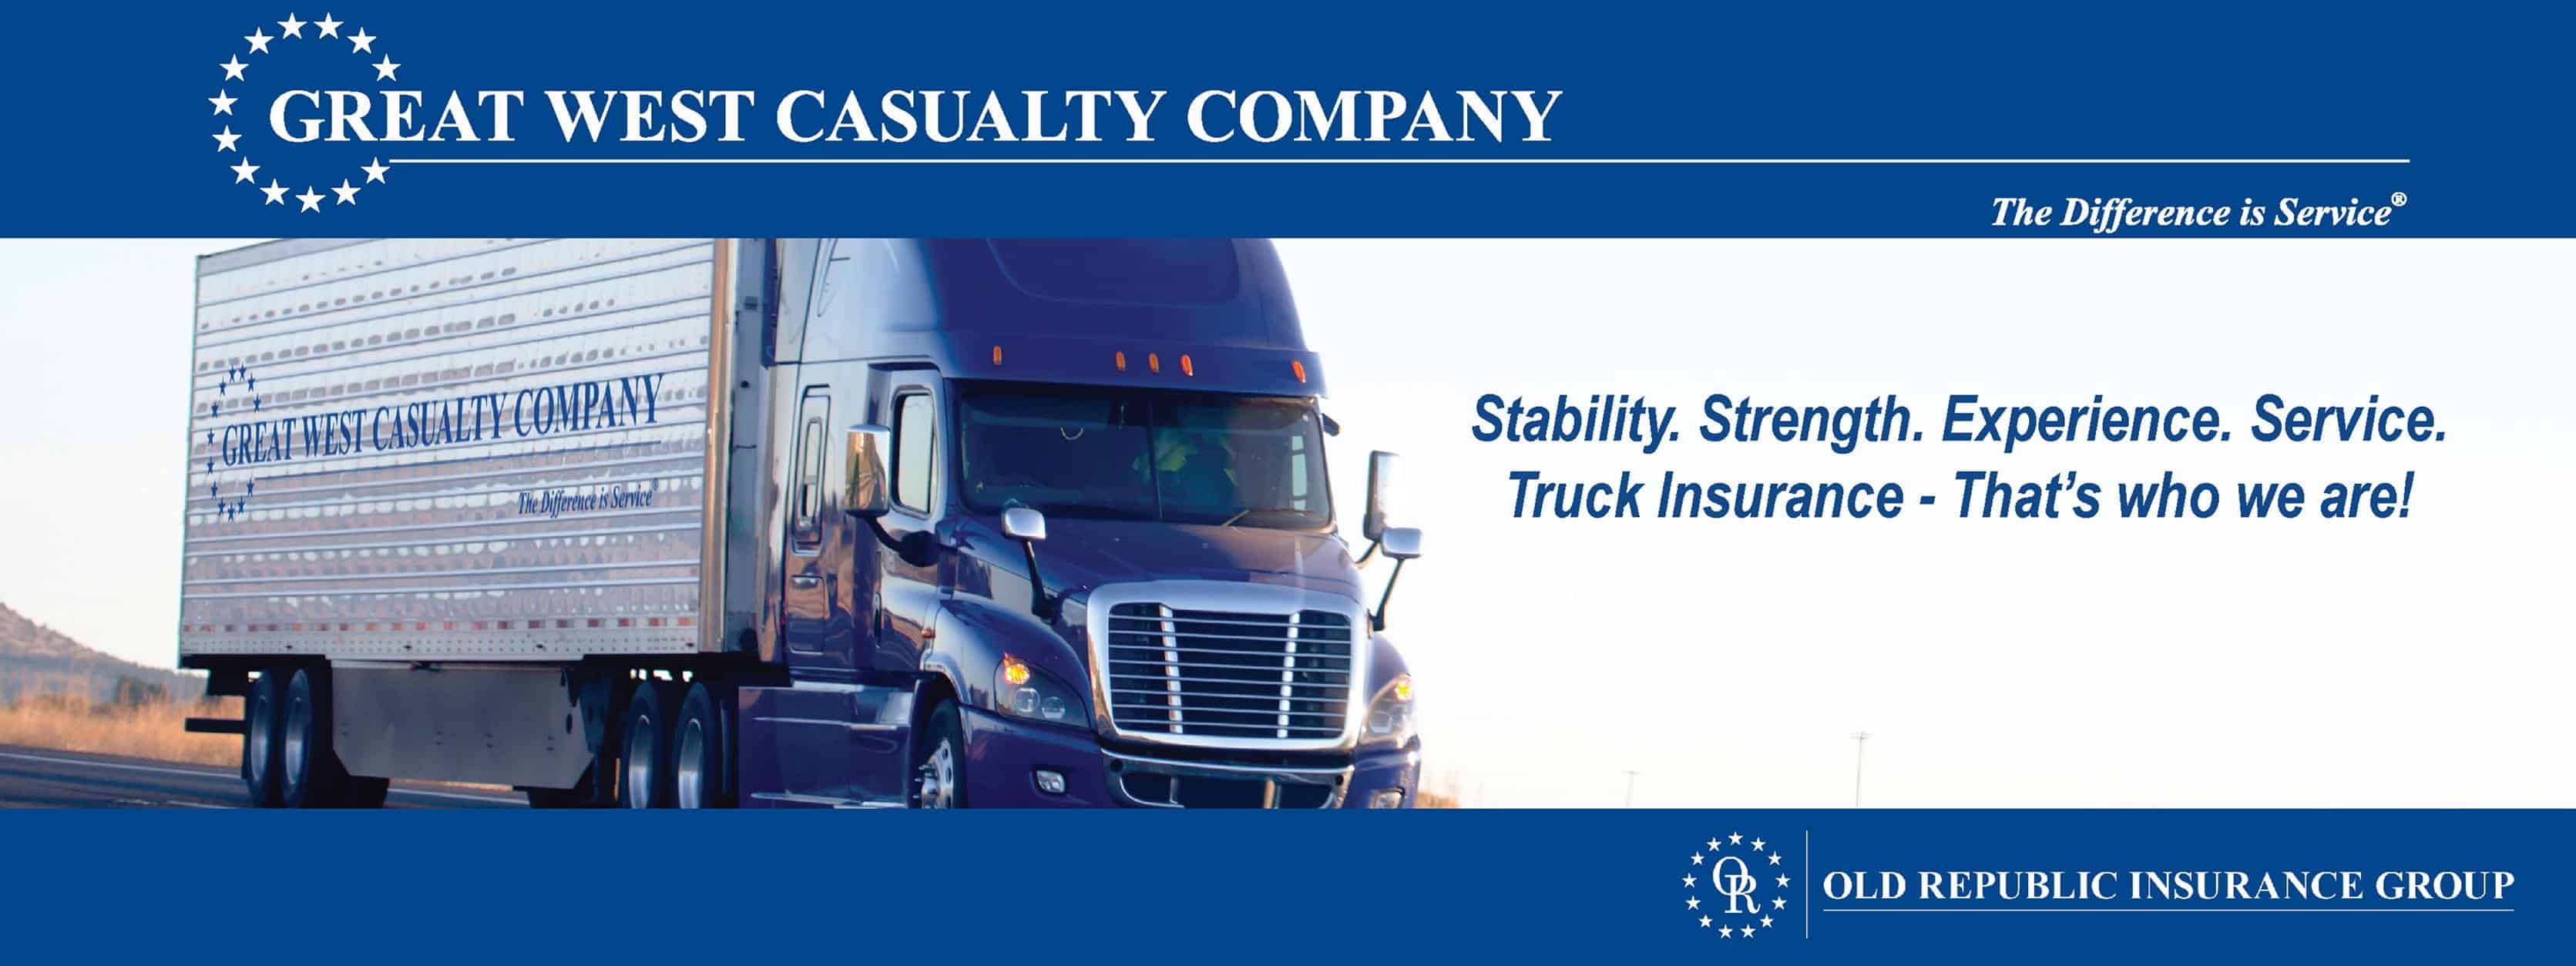 great west casualty trucking insurance review